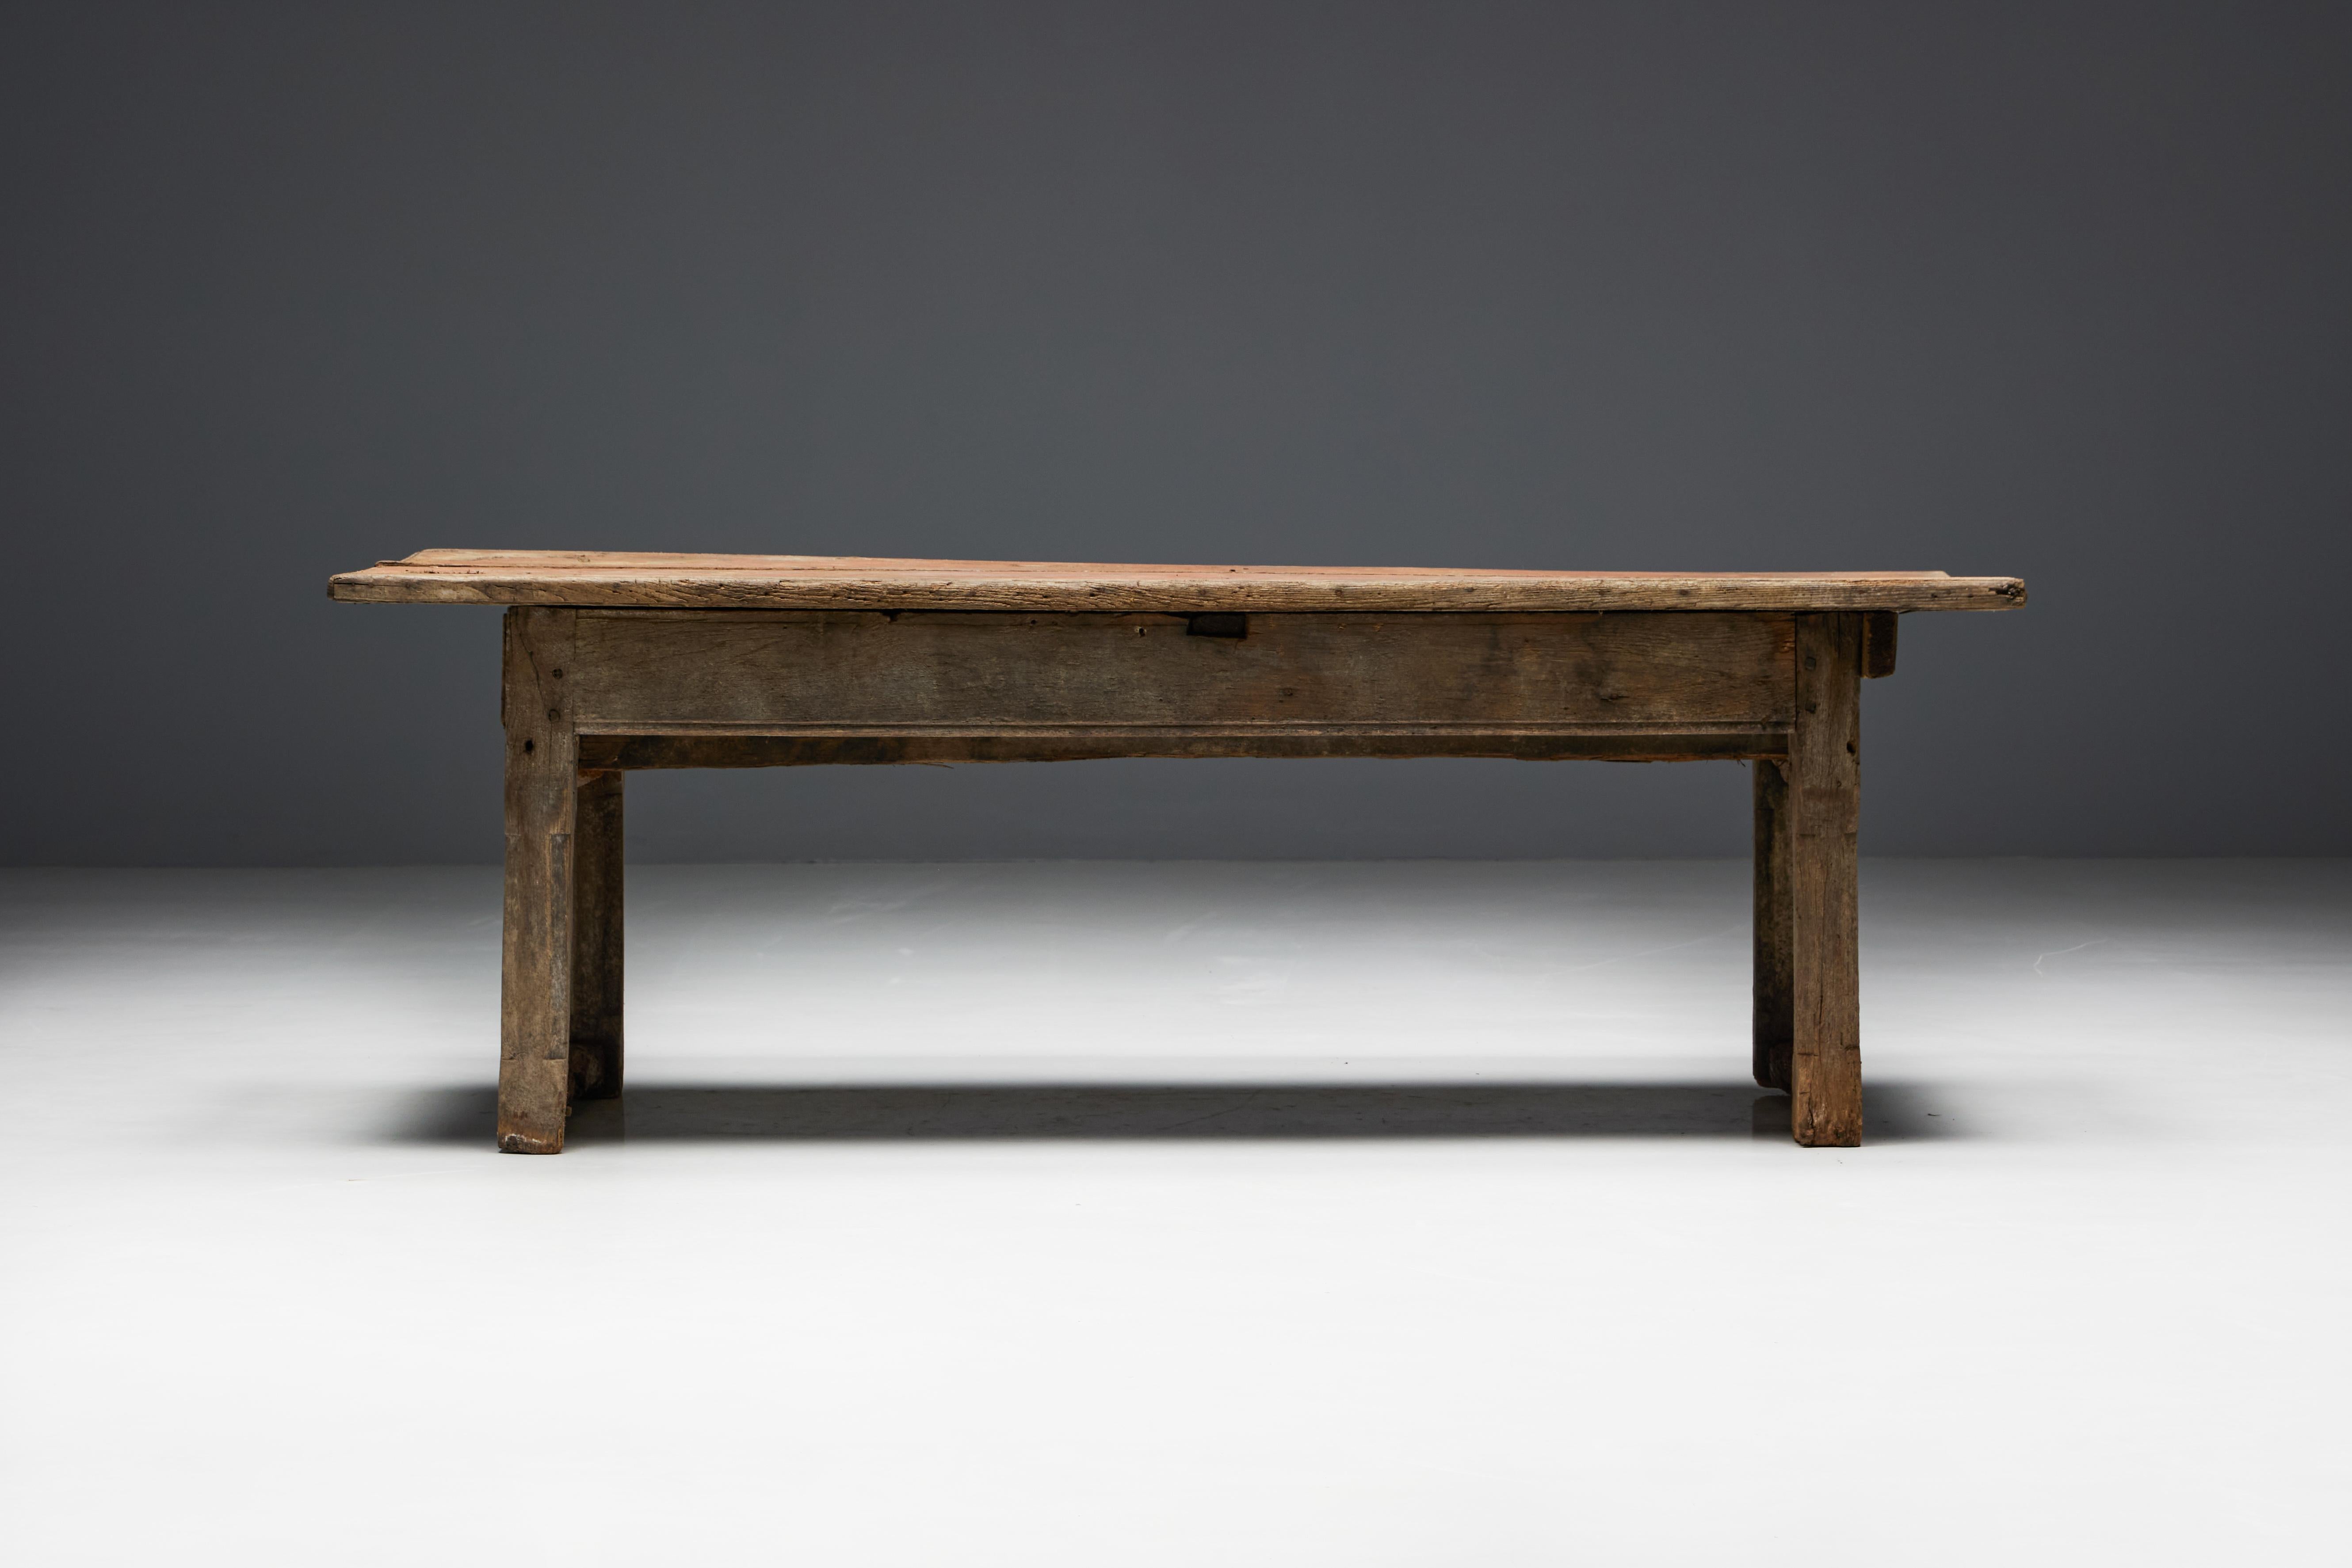 Rustic Travail Populaire Dining Table, France, Early 19th Century For Sale 5